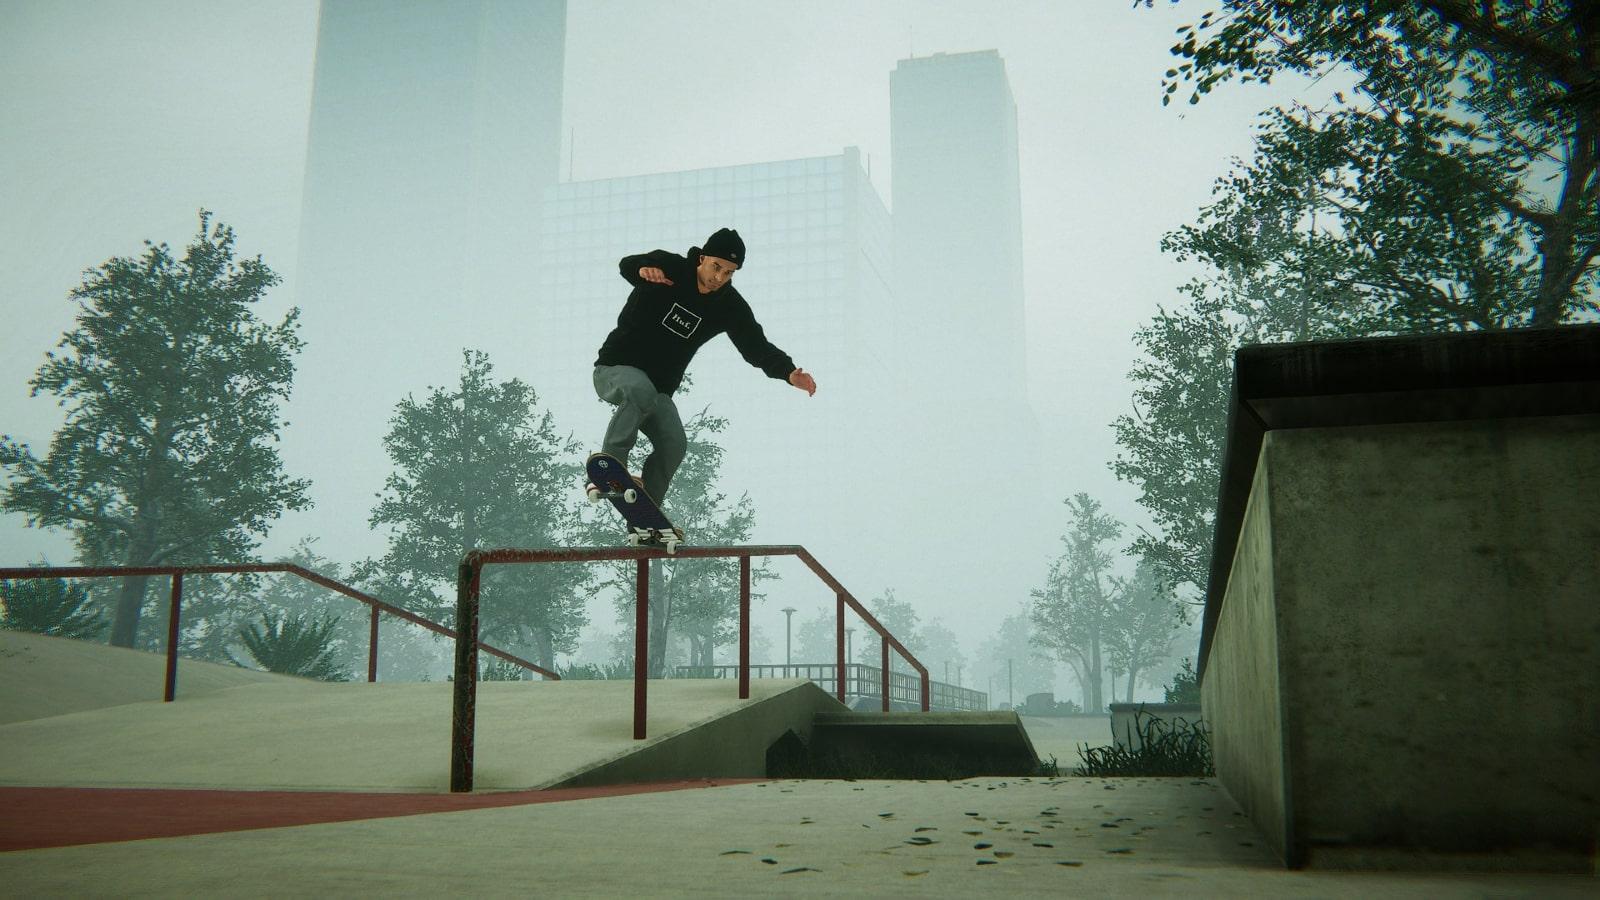 Skate 3 Cheat Codes ☆ All The Best Cheats for Skate 3